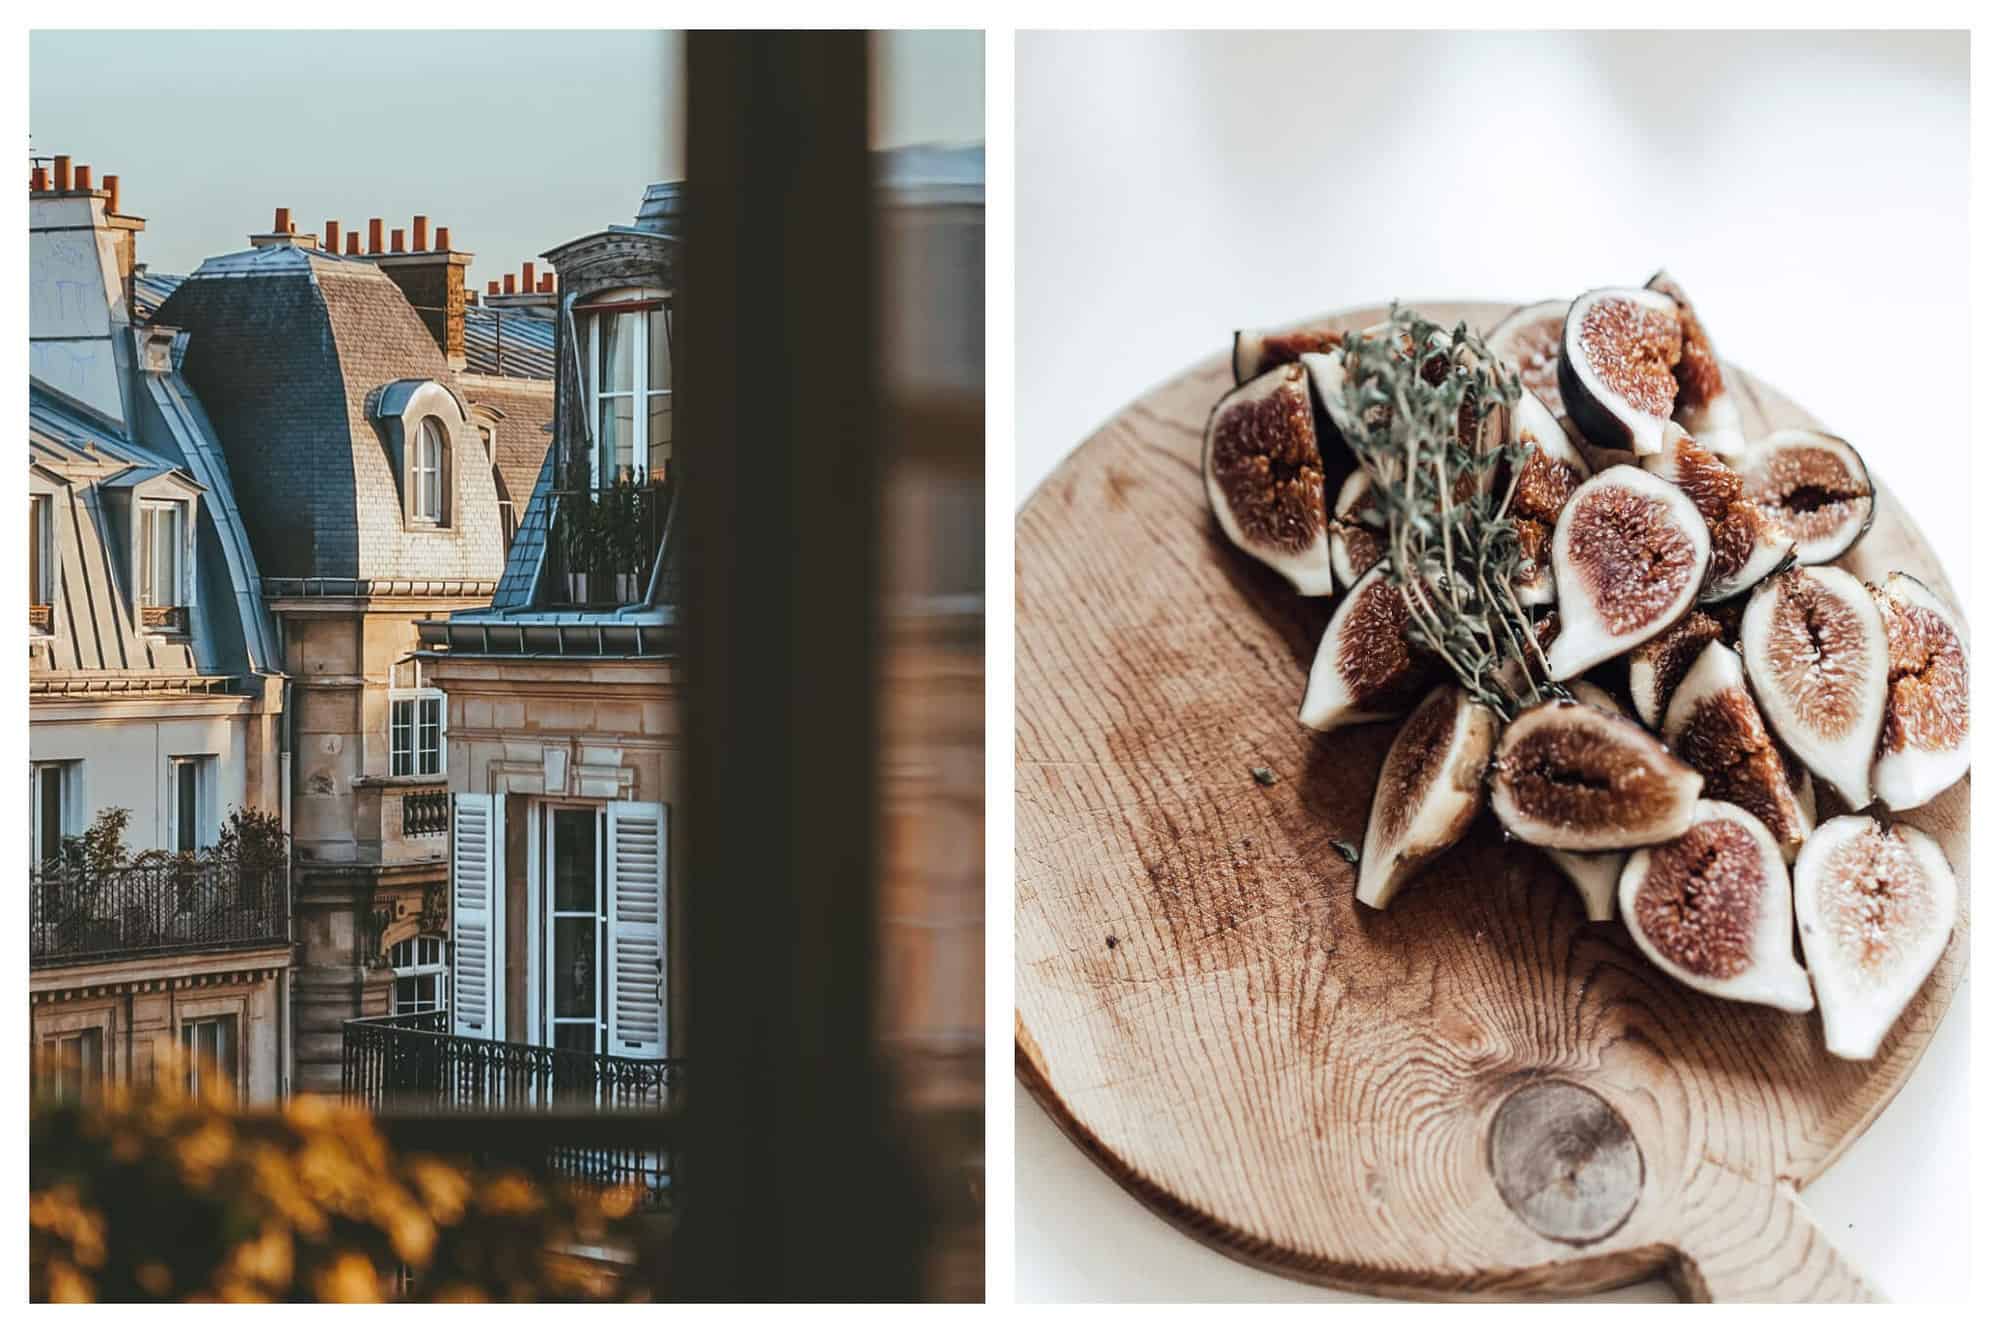 left: a snapshot of a parisian building from a window. there is also a bit of tree visible in the frame, with autumnal golden leaves. right: a plate of cut figs neatly decorated on a wooden serving platter